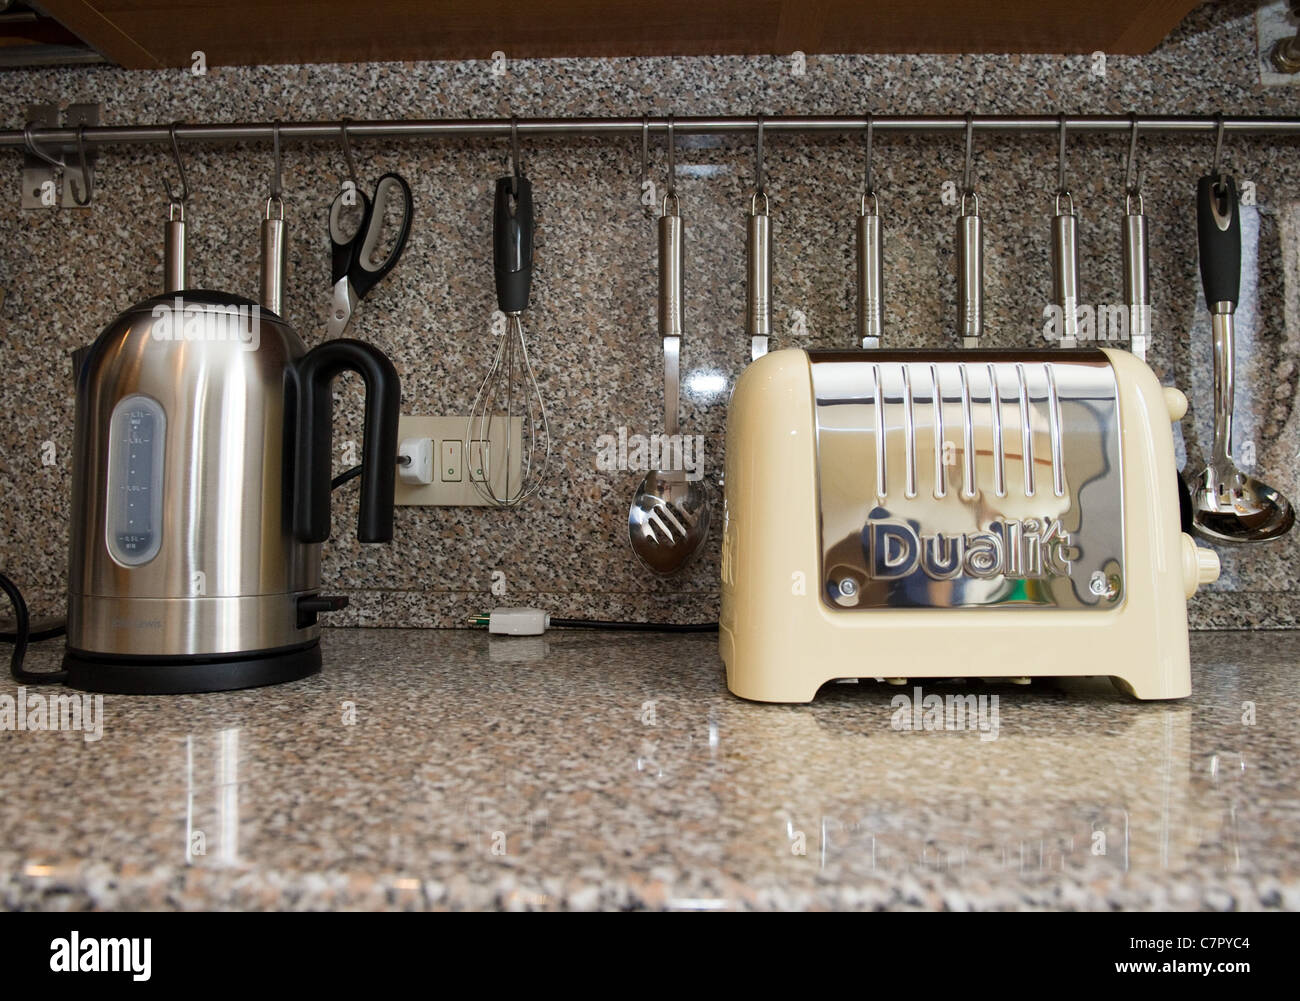 https://c8.alamy.com/comp/C7PYC4/toaster-and-kettle-in-a-modern-kitchen-C7PYC4.jpg